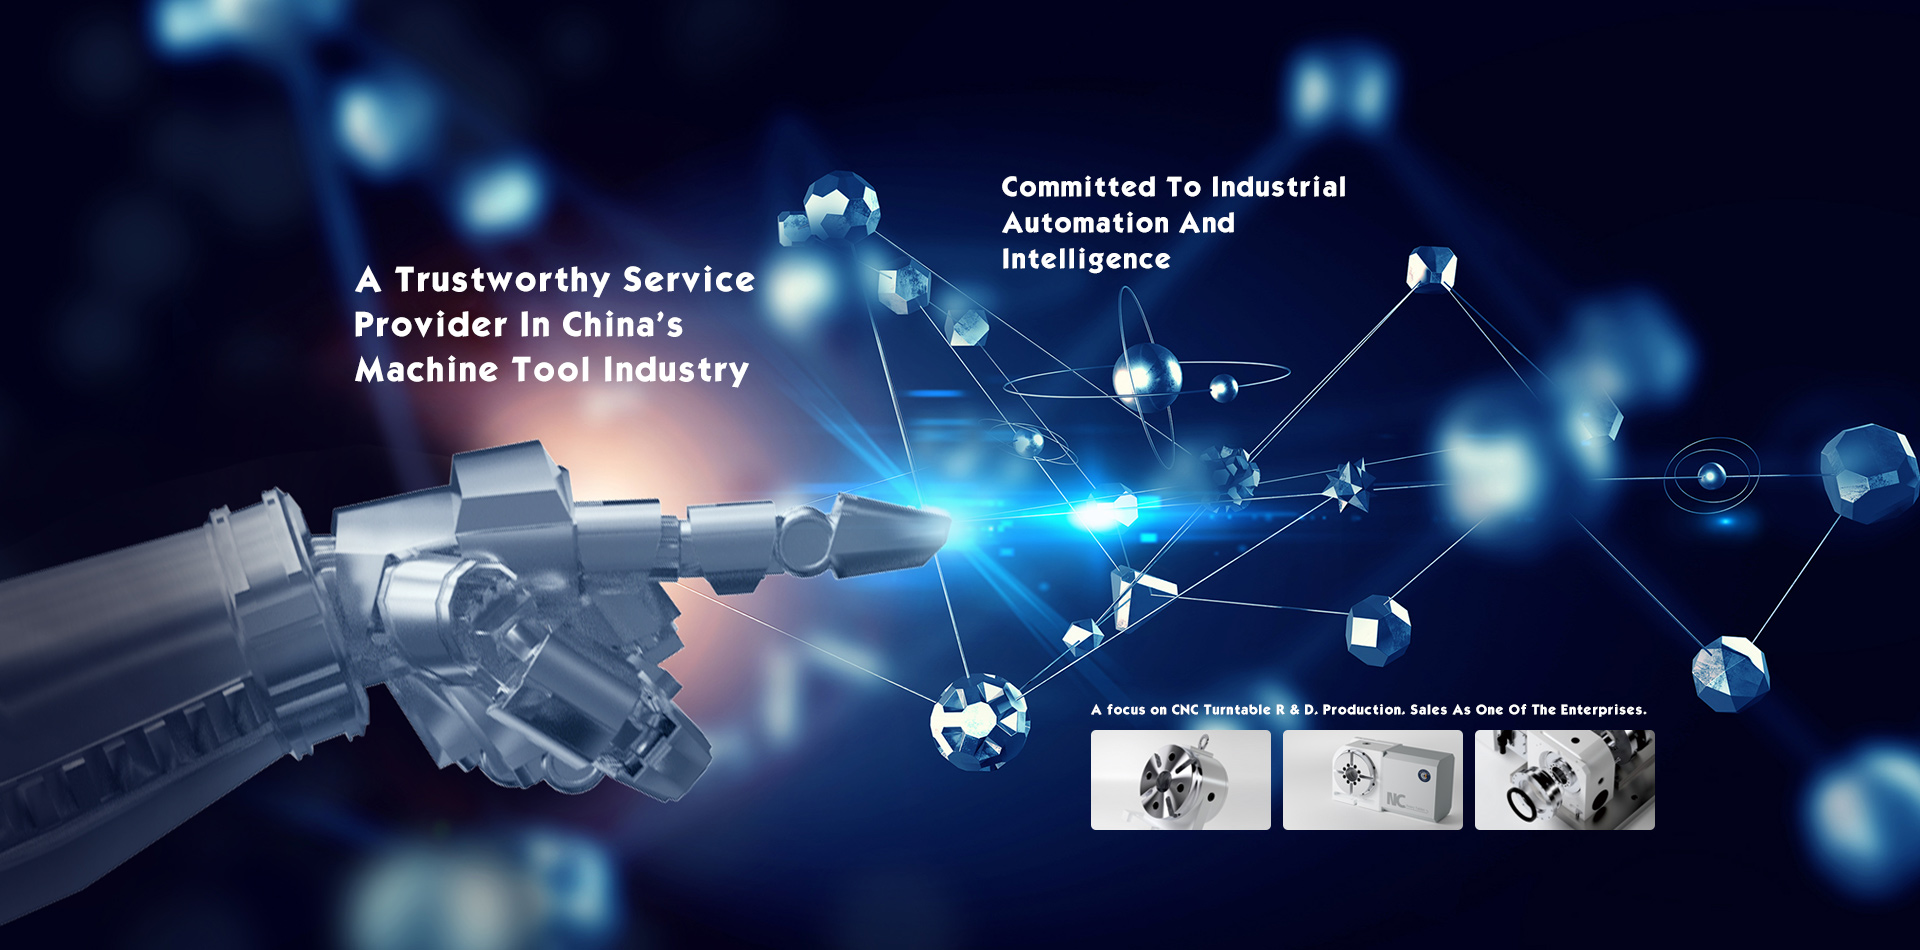 A Trustworthy Service Provider In Chinas Machine Tool Industry